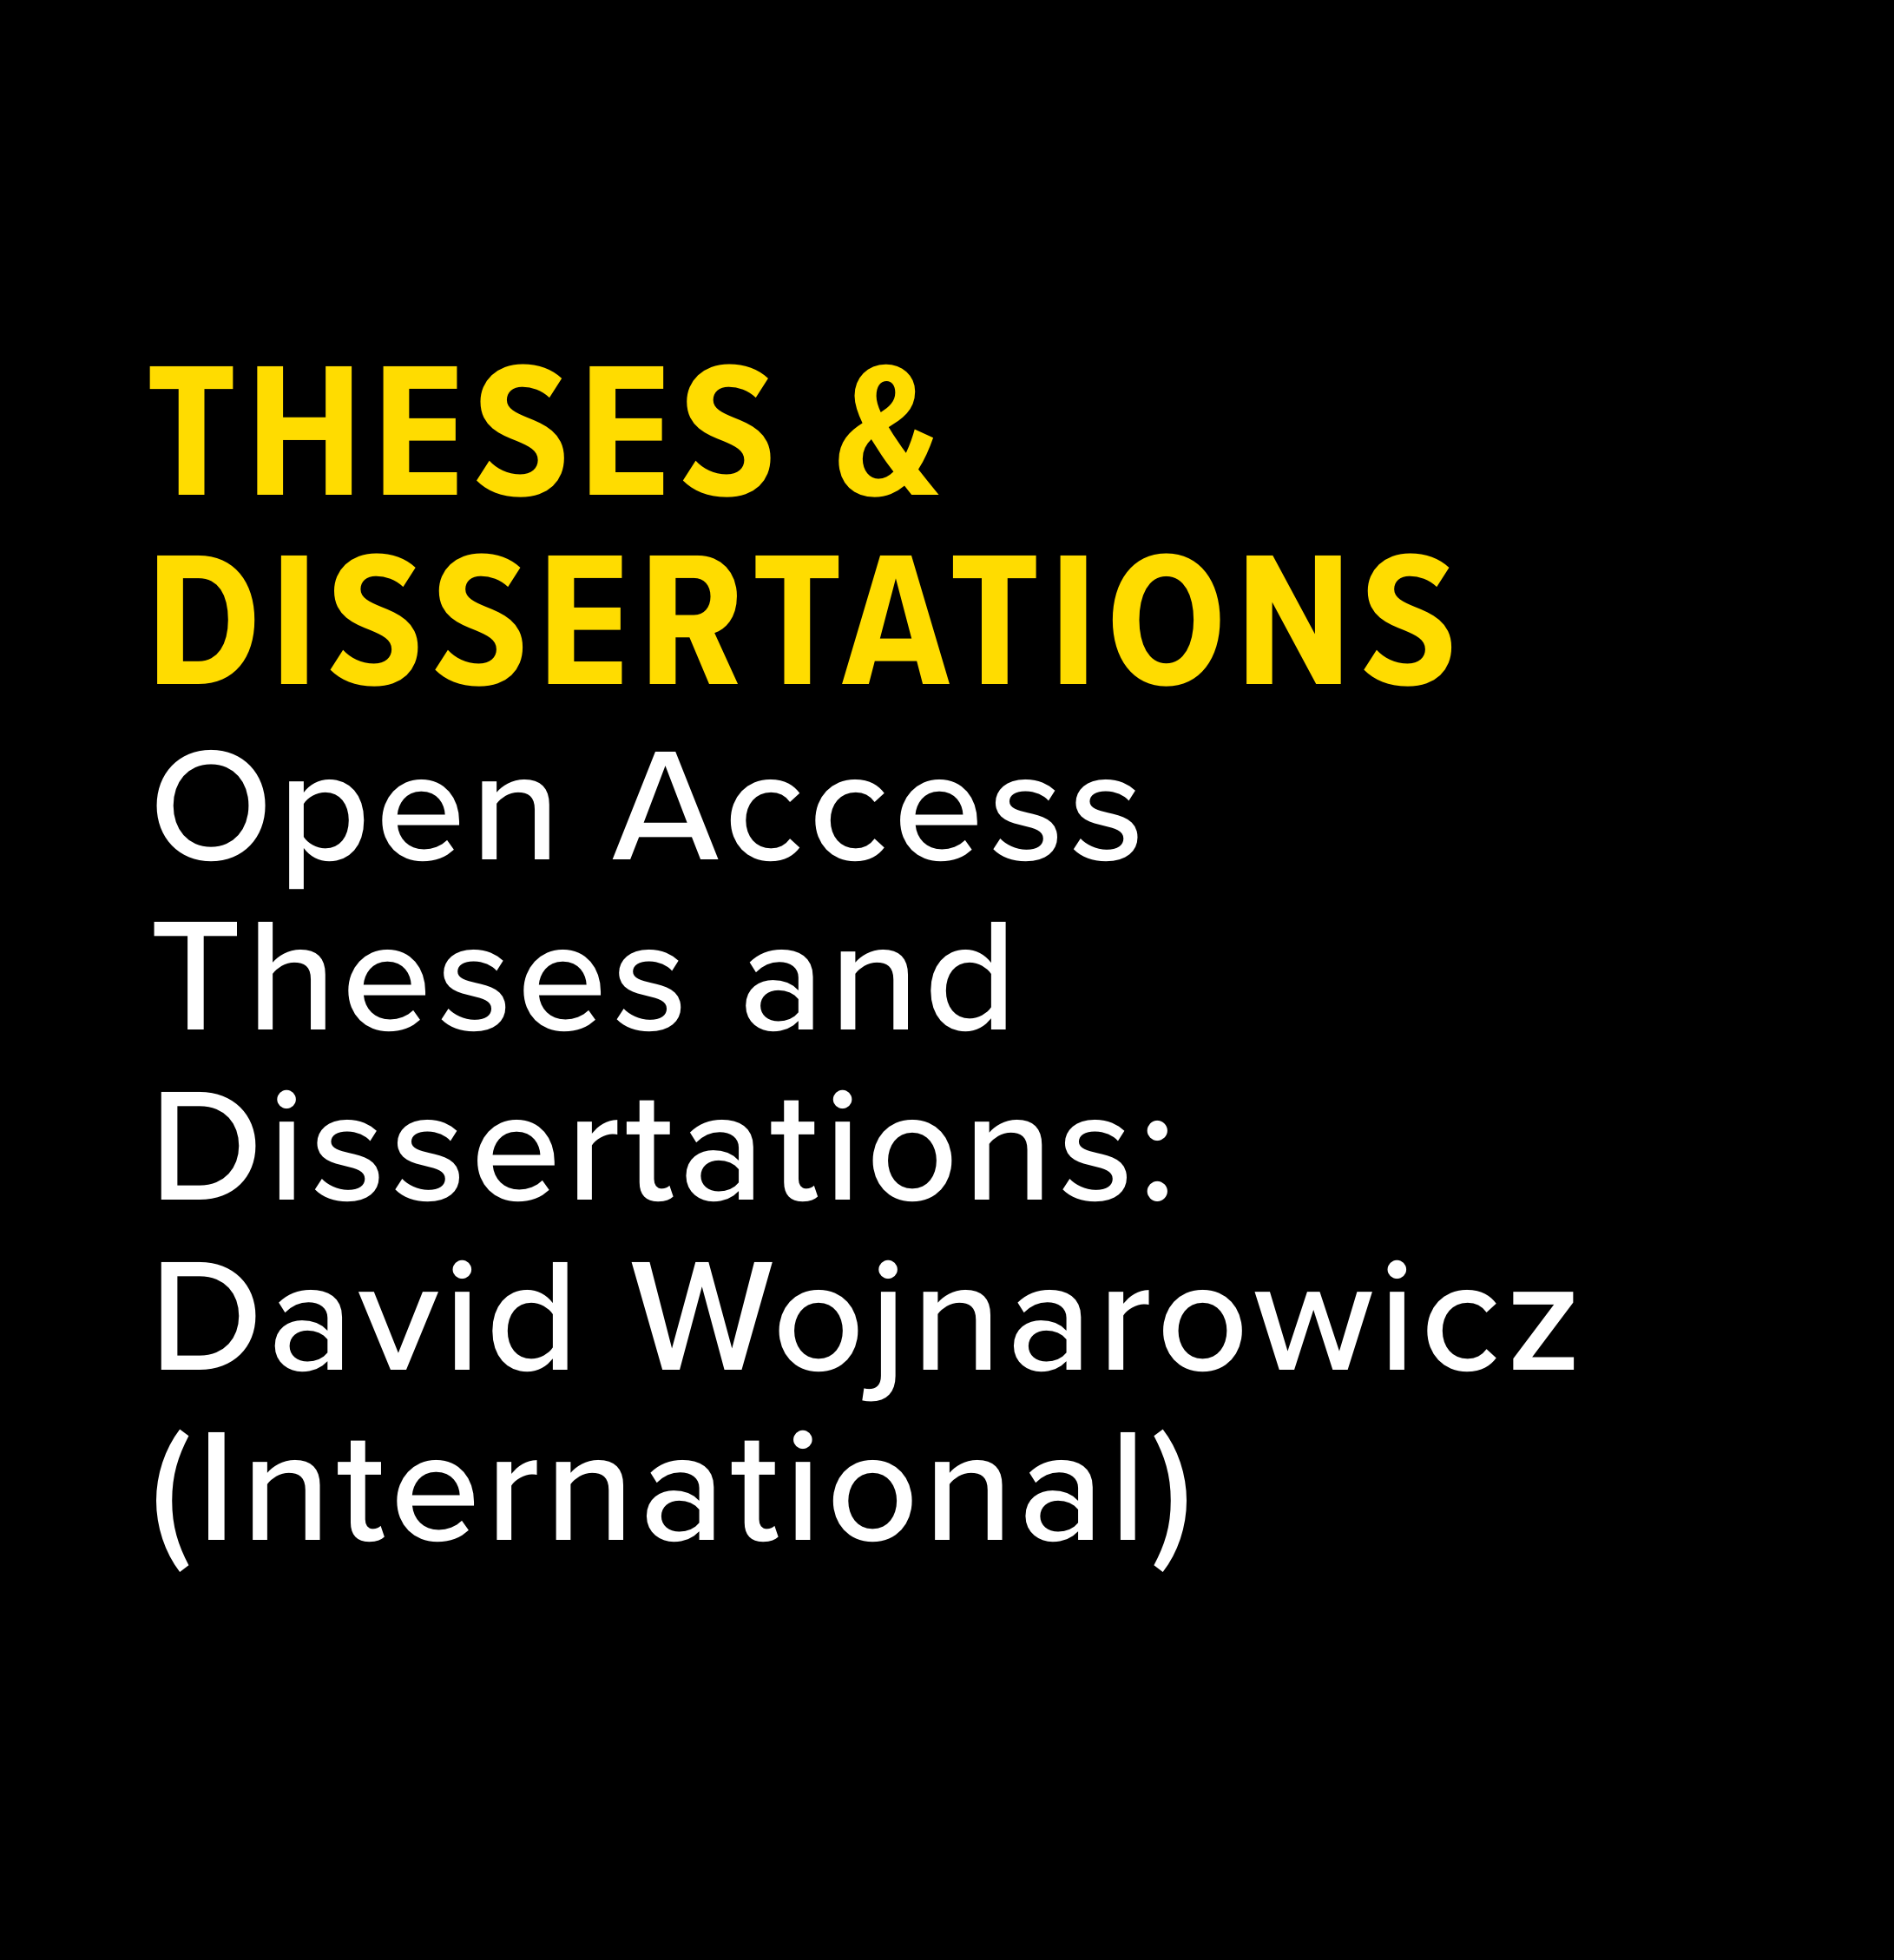 Open Access Theses and Dissertations: David Wojnarowicz (International)